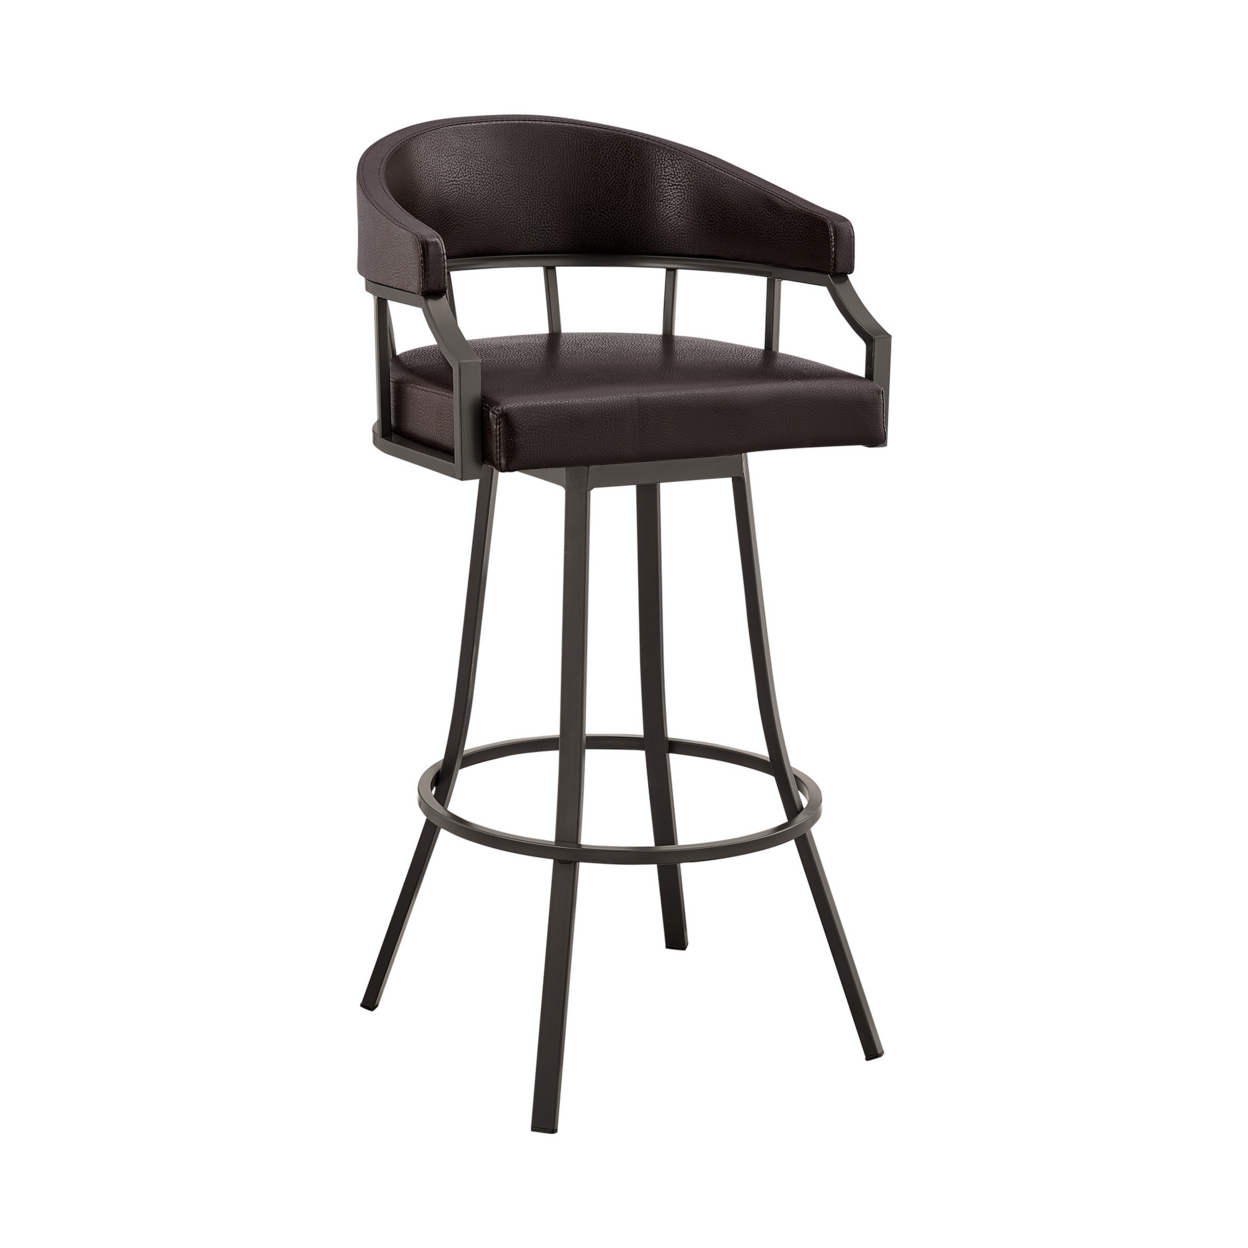 Cade 26 Inch Counter Stool, Cushioned, Swivel Chair, Faux Leather, Brown- Saltoro Sherpi